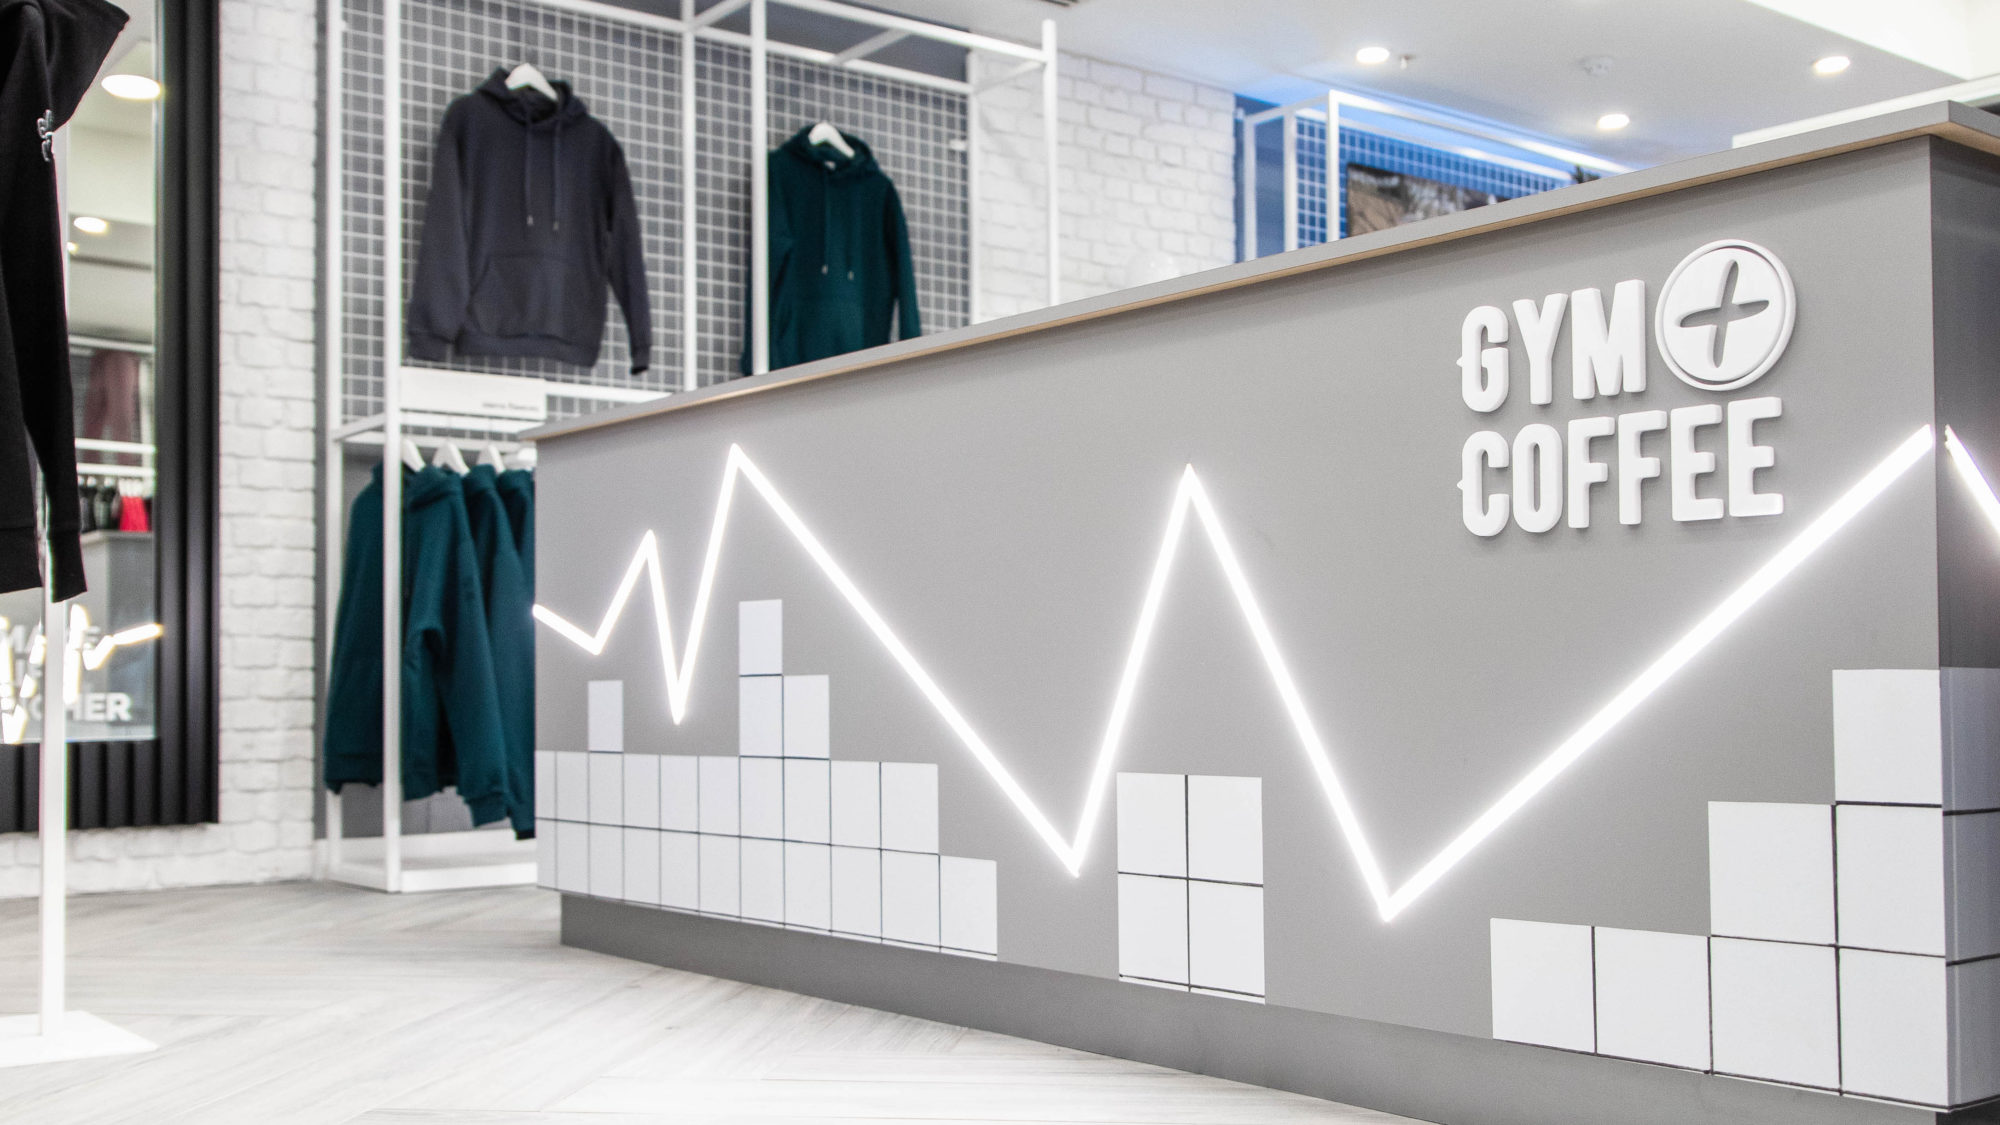 Gym+Coffee strengthens omnichannel business operations